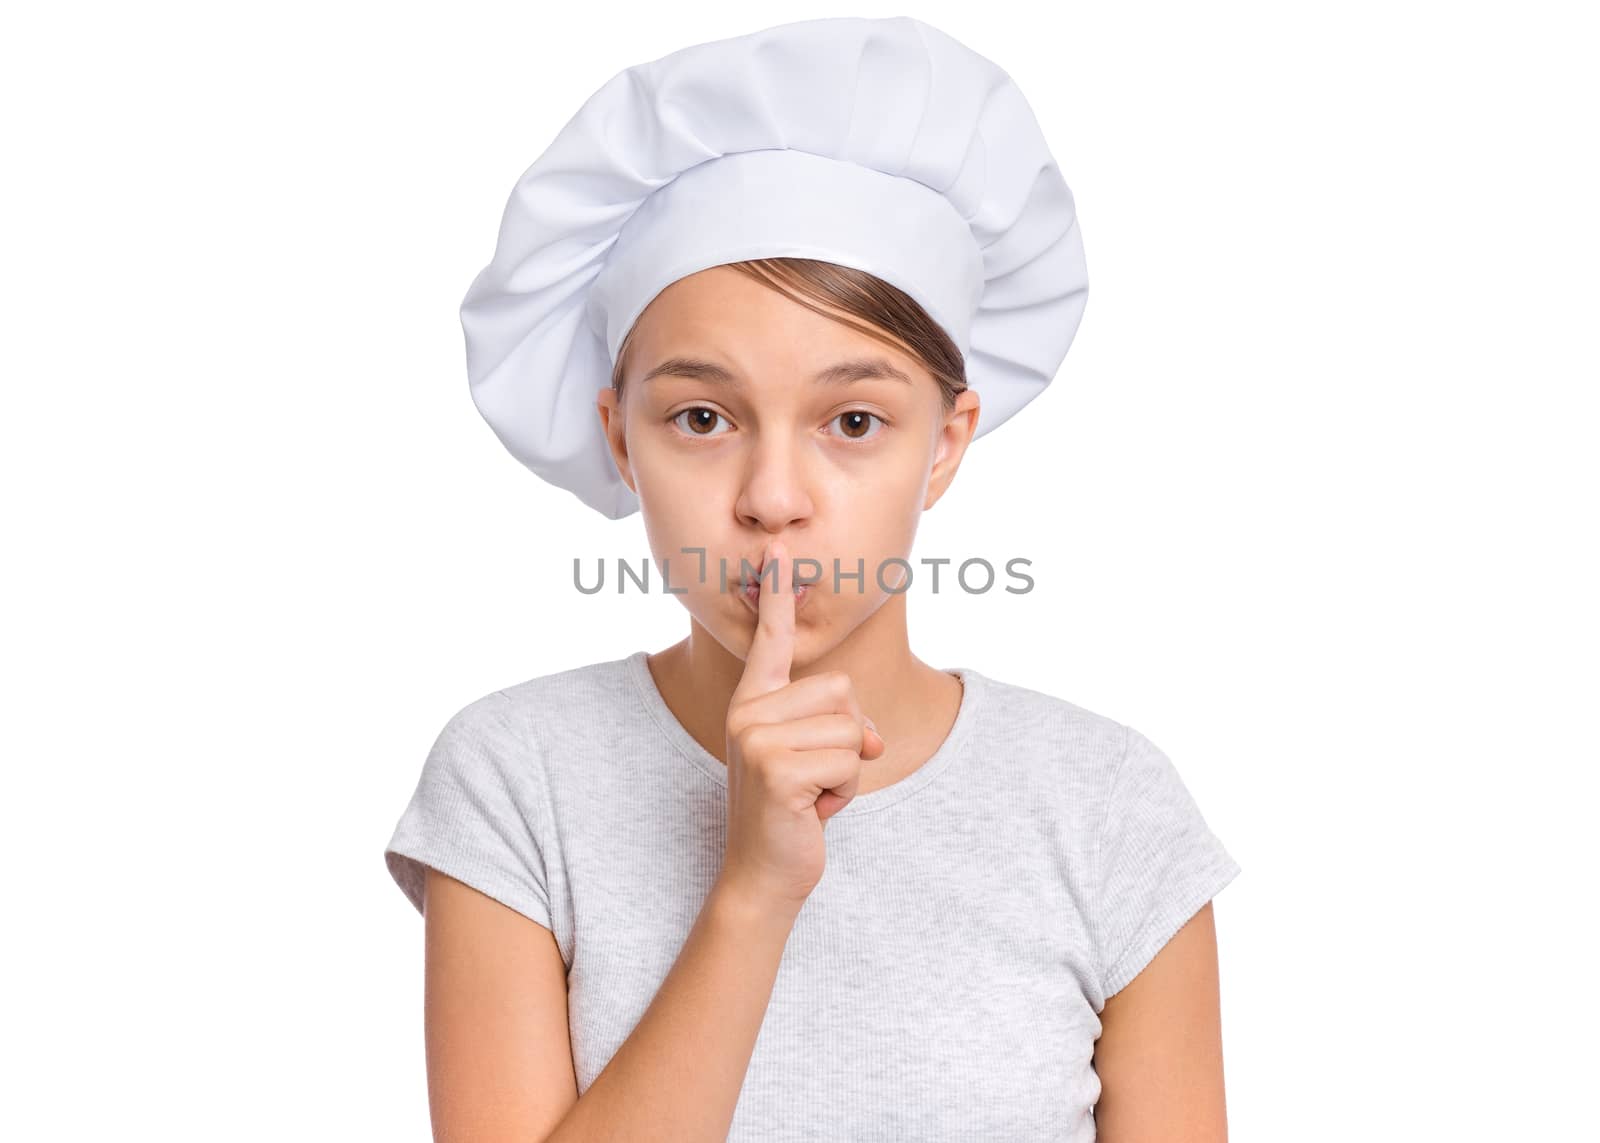 Teen girl in chef hat with emotions showing signs with hands, isolated on a white background.